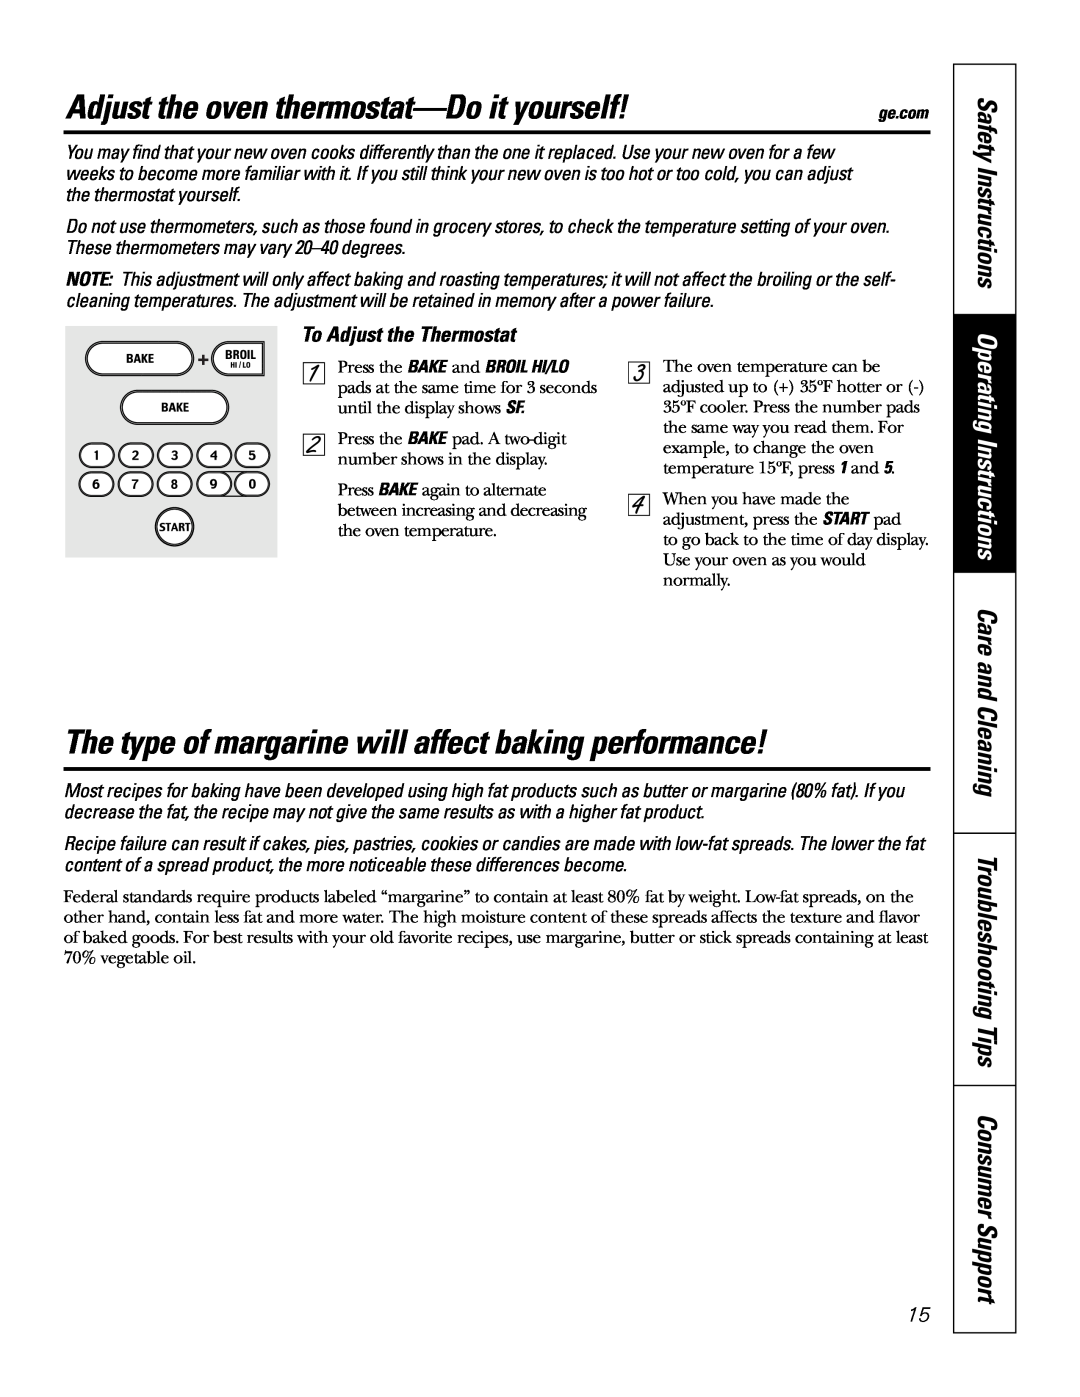 GE JSP46 owner manual Adjust the oven thermostat-Do it yourself, The type of margarine will affect baking performance 